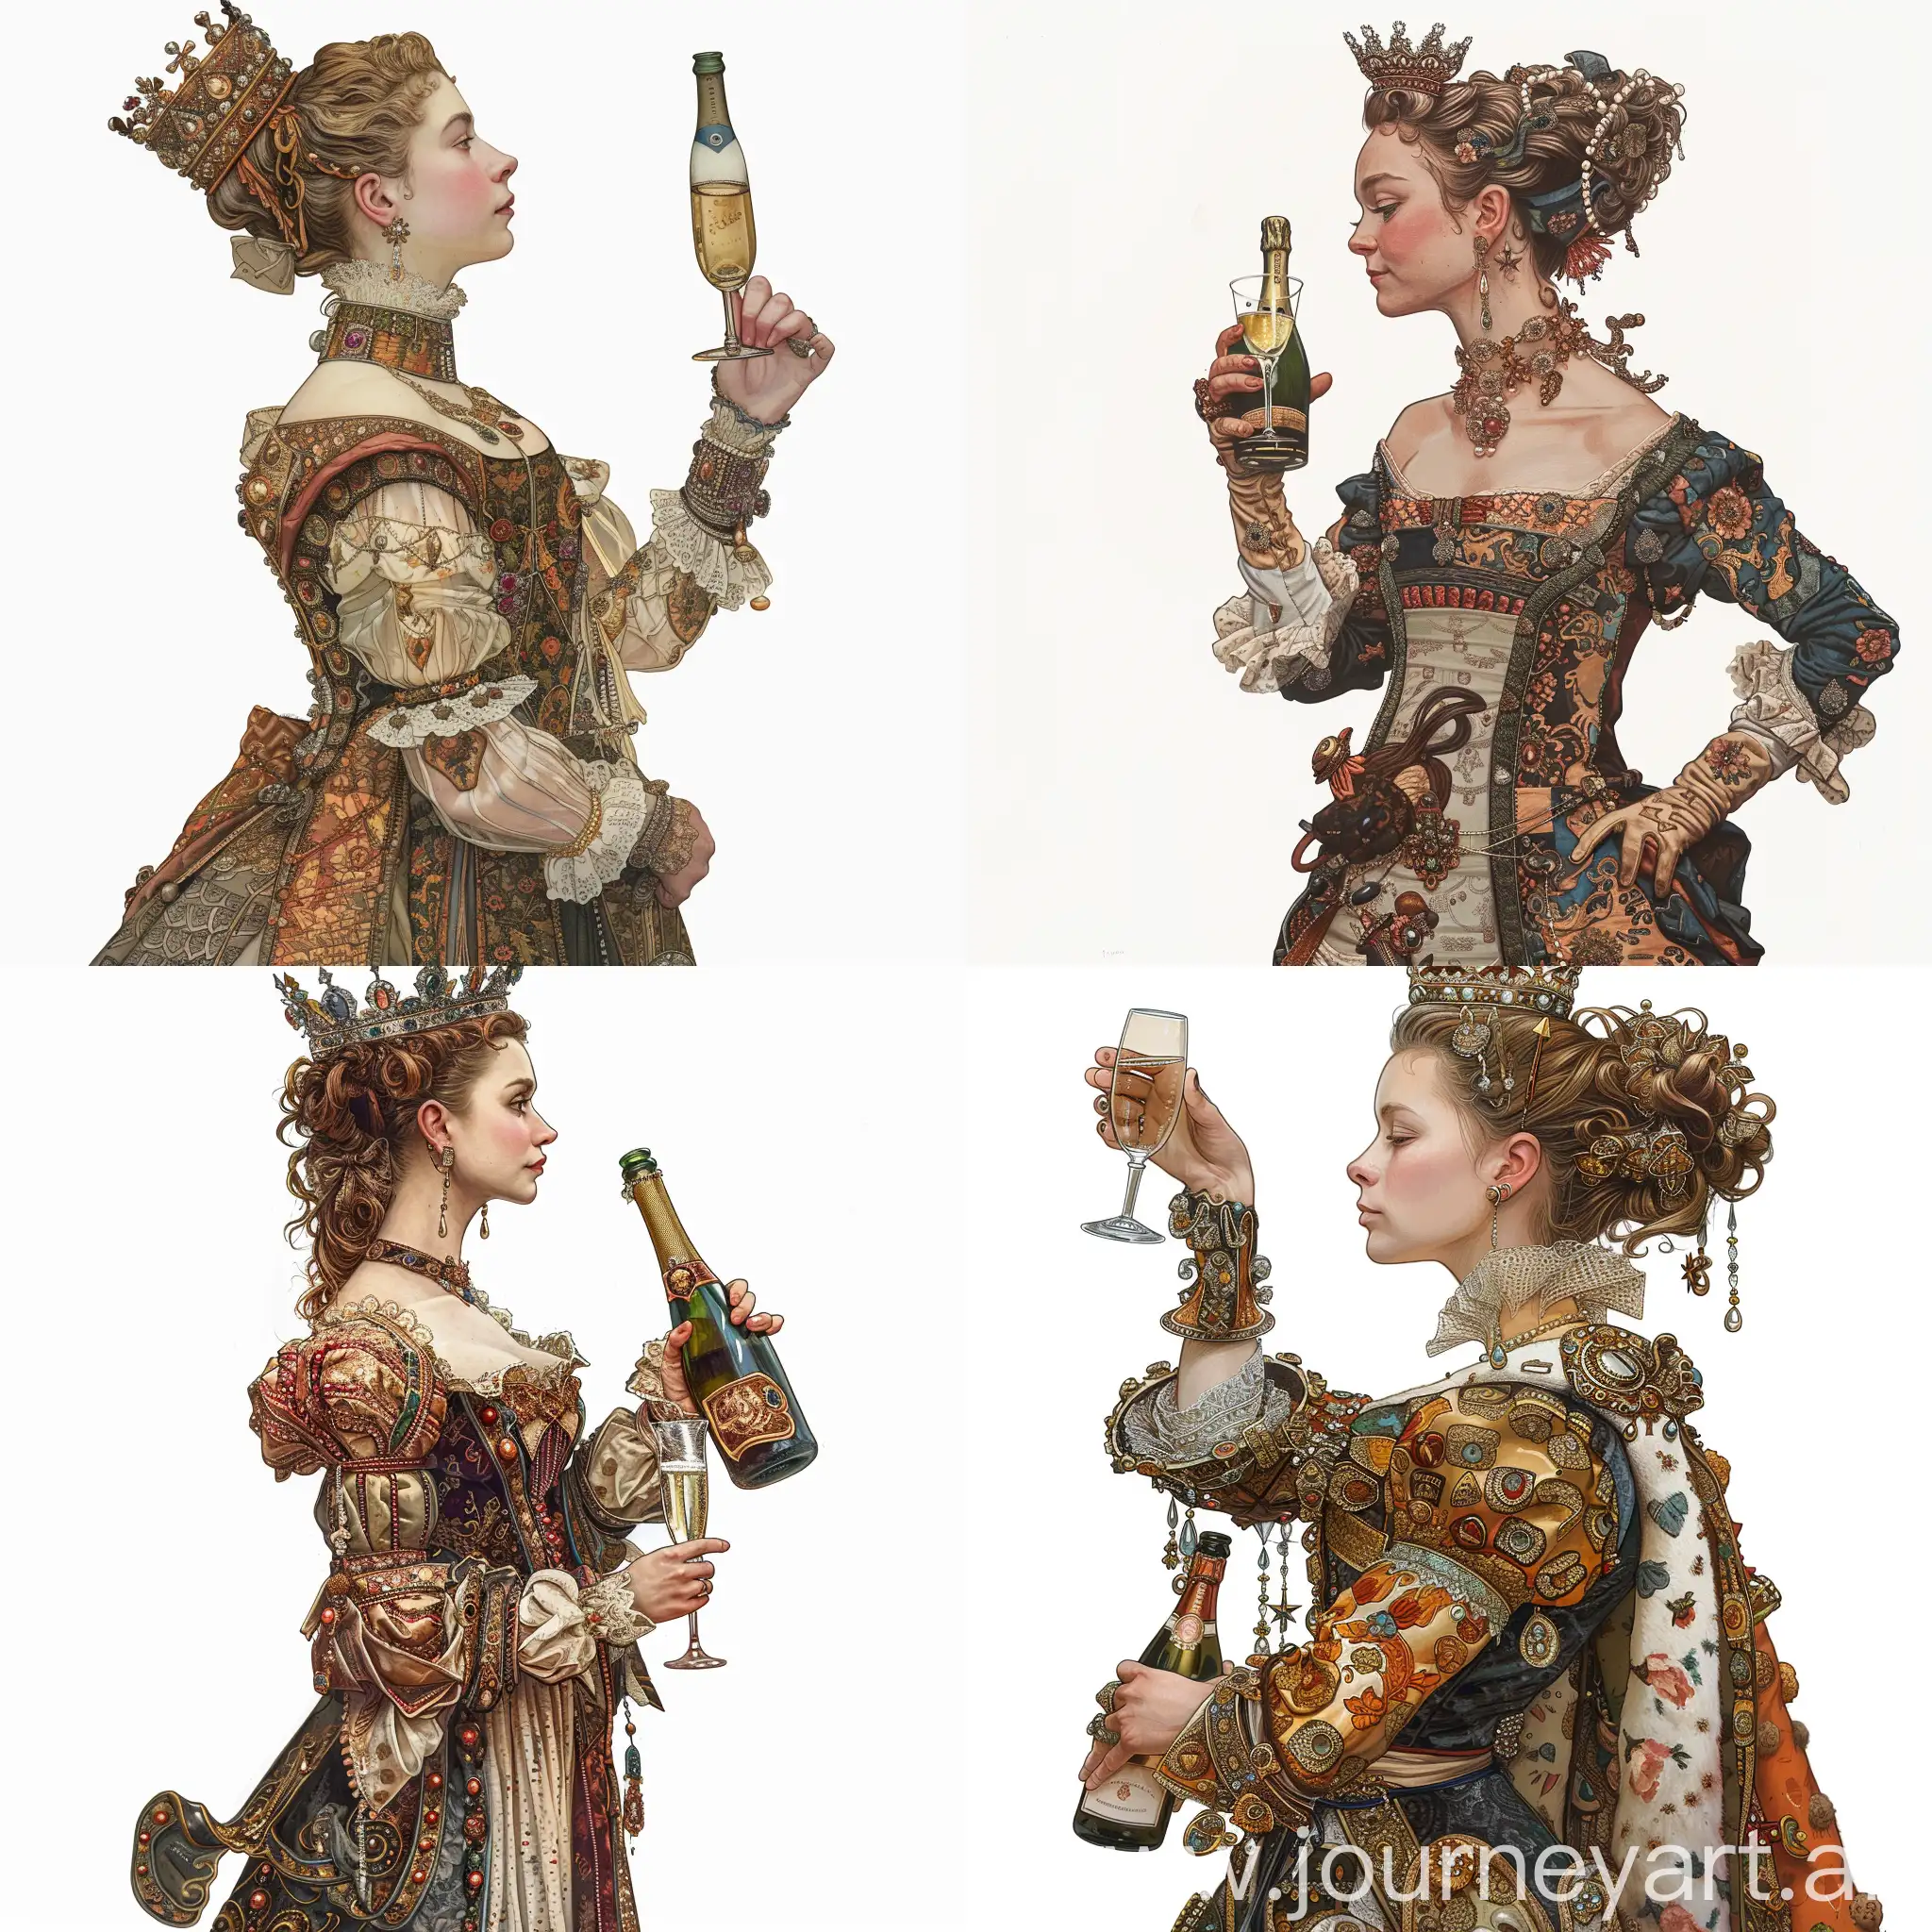 The queen of ancient England in profile, waist-high portrait, with a crown on her head, looking straight, in antique ornate, exquisite clothes, holding a glass glass with champagne at chin level, the other arm bent at the elbow and holding a bottle, complex colors, illustration, on a white background, Arthur Wrexham style